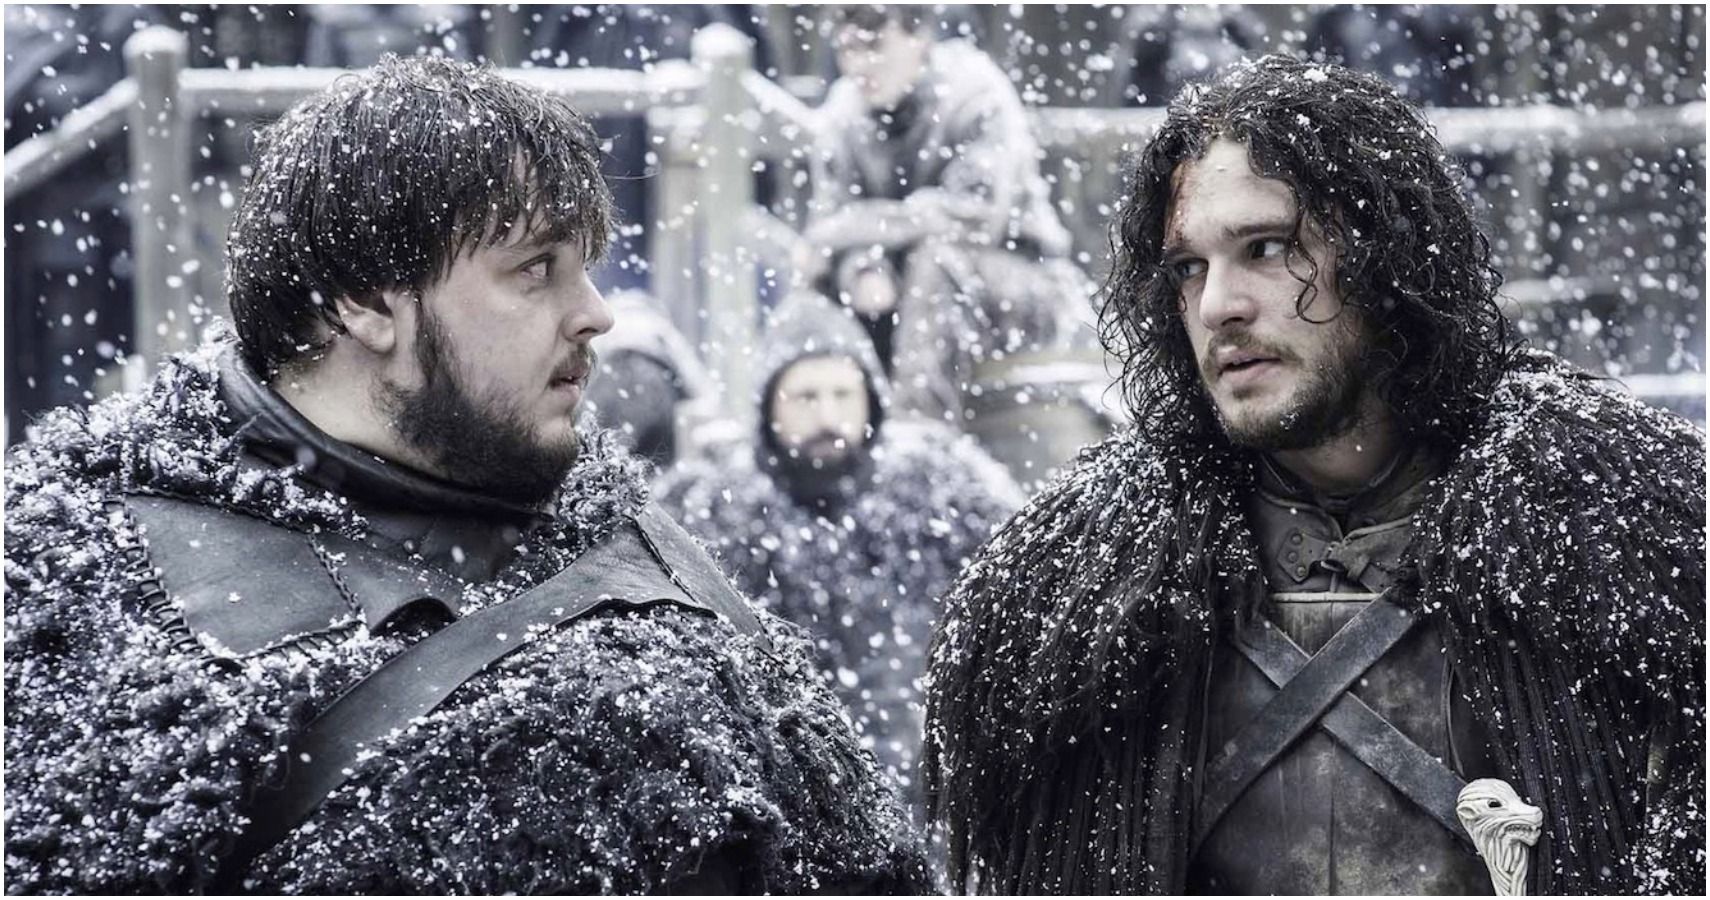 Game Of Thrones 10 Reasons Why Jon Snow & Samwell Tarly Aren’t Real Friends